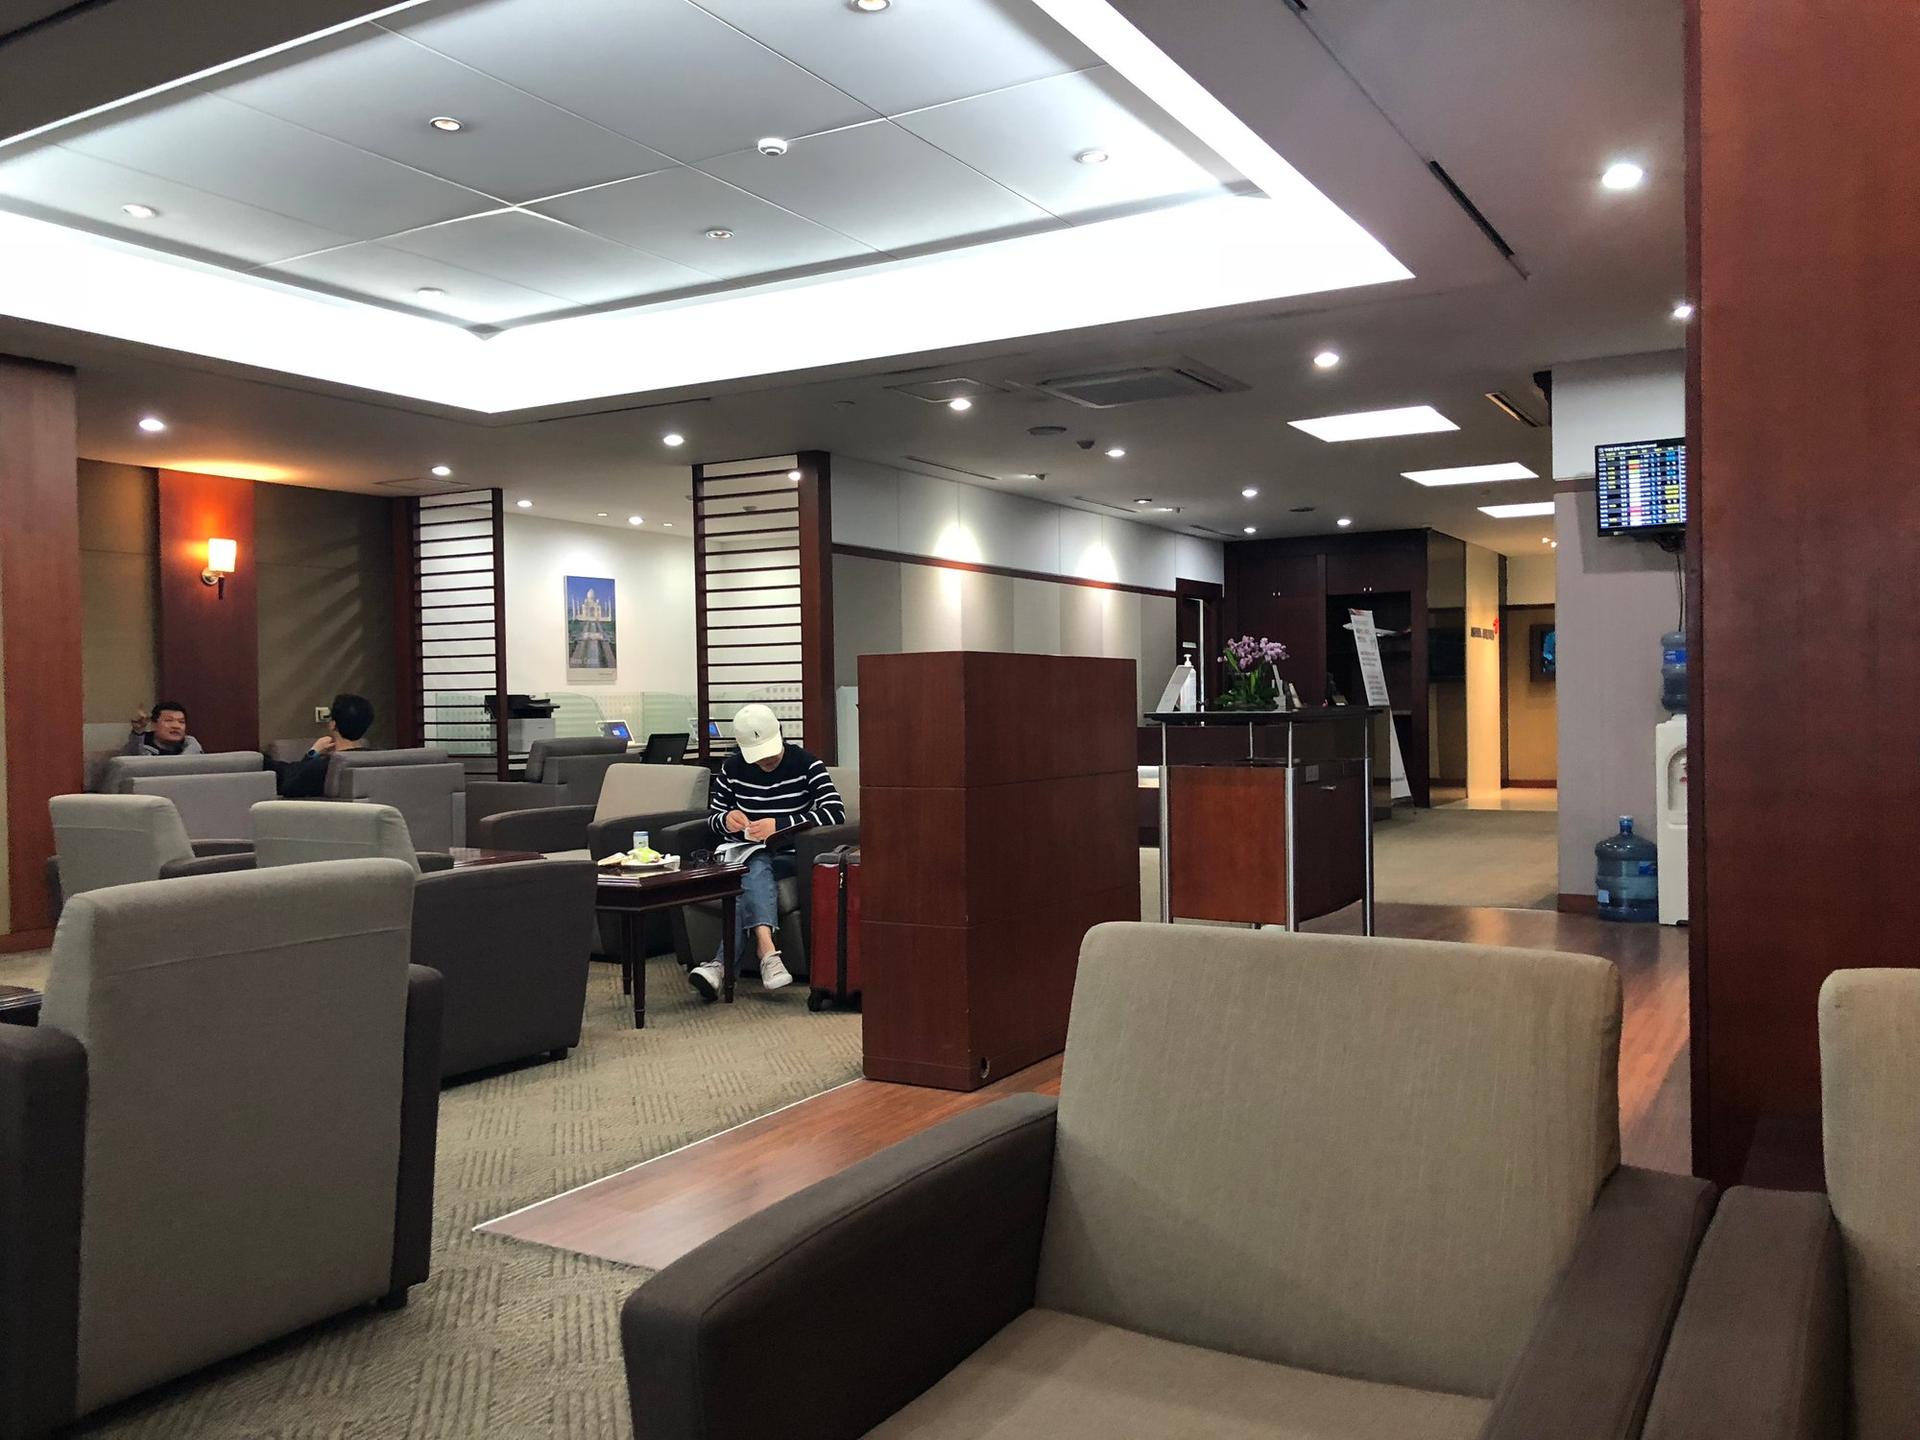 Asiana Airlines Lounge image 2 of 24